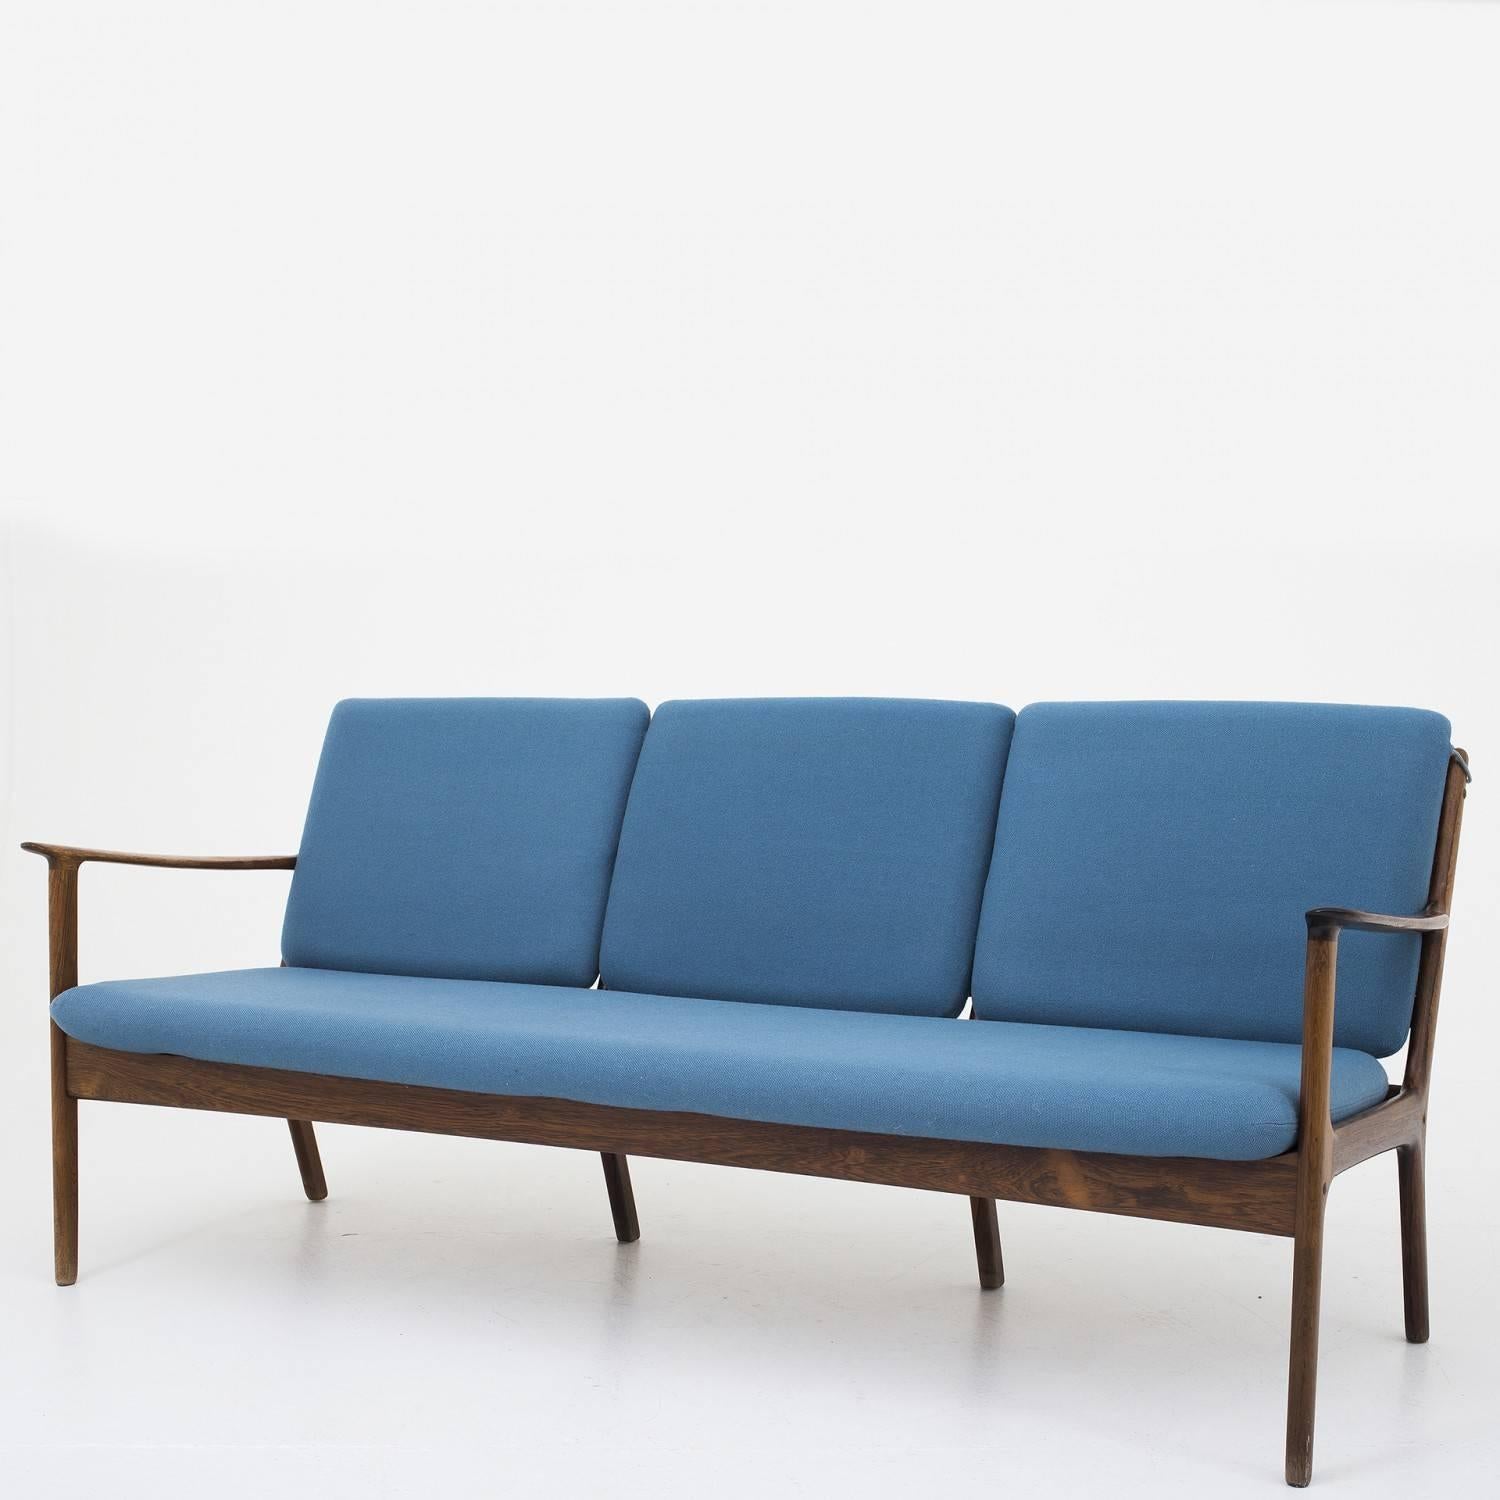 PJ 112 three-seat sofa in rosewood and original wool cushions. Designed by Ole Wancher. Maker P.J. Furniture.